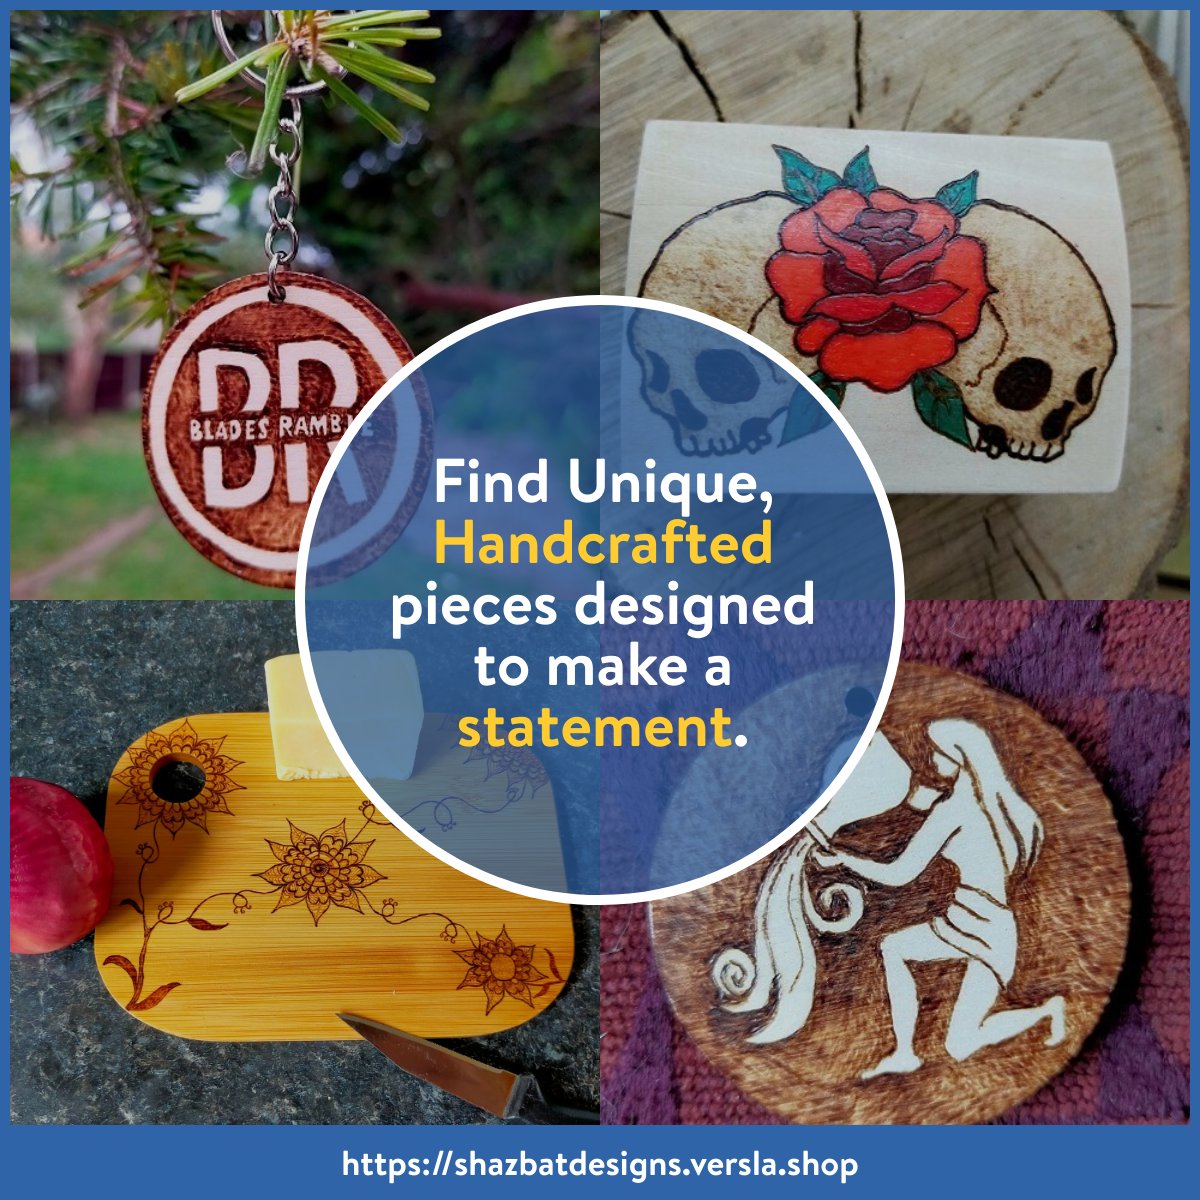 #MHHSBD 𝐑𝐮𝐬𝐭𝐢𝐜 𝐩𝐲𝐫𝐨 𝐚𝐫𝐭 𝐟𝐨𝐫 𝐡𝐨𝐦𝐞𝐬 Add a rustic touch to your home with Shazbat Designs’ hand-burnt pyro items. Perfect for those who appreciate the art of wood burning. A link to her website is in the comments.